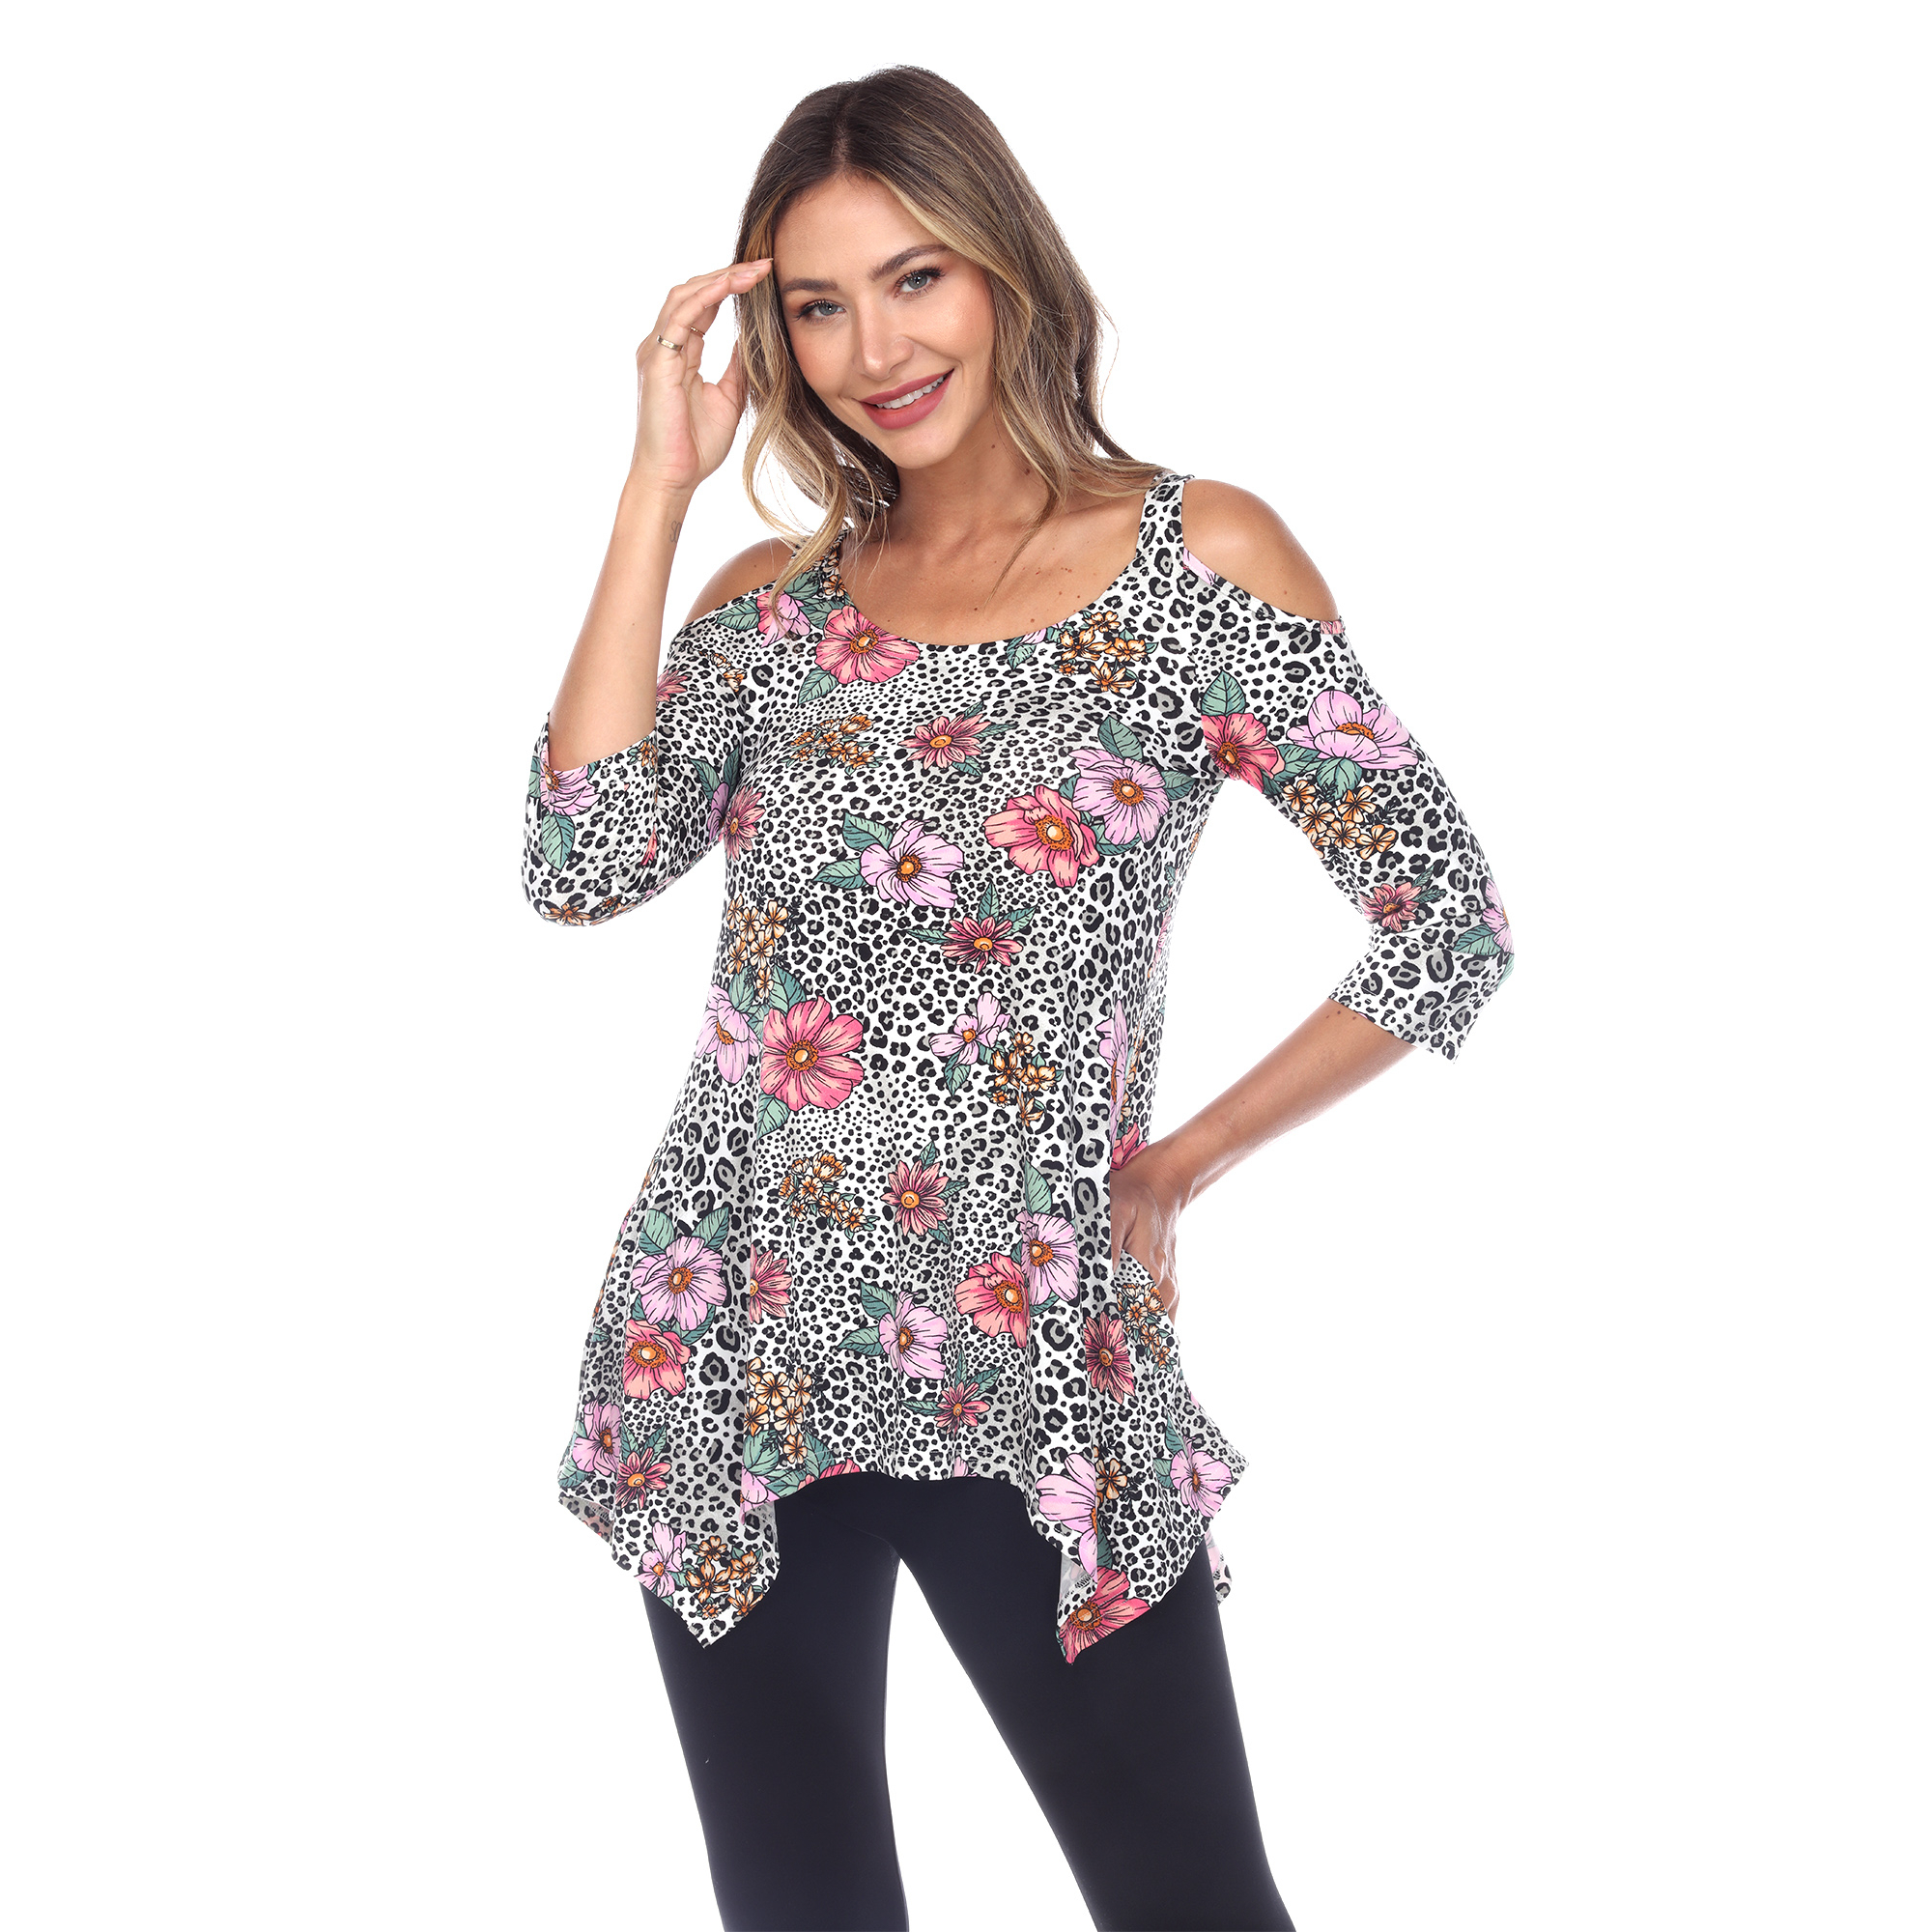 White Mark Women's Cold Shoulder Quarter Sleeve Printed Tunic Top With Pockets - Leopard, 3X